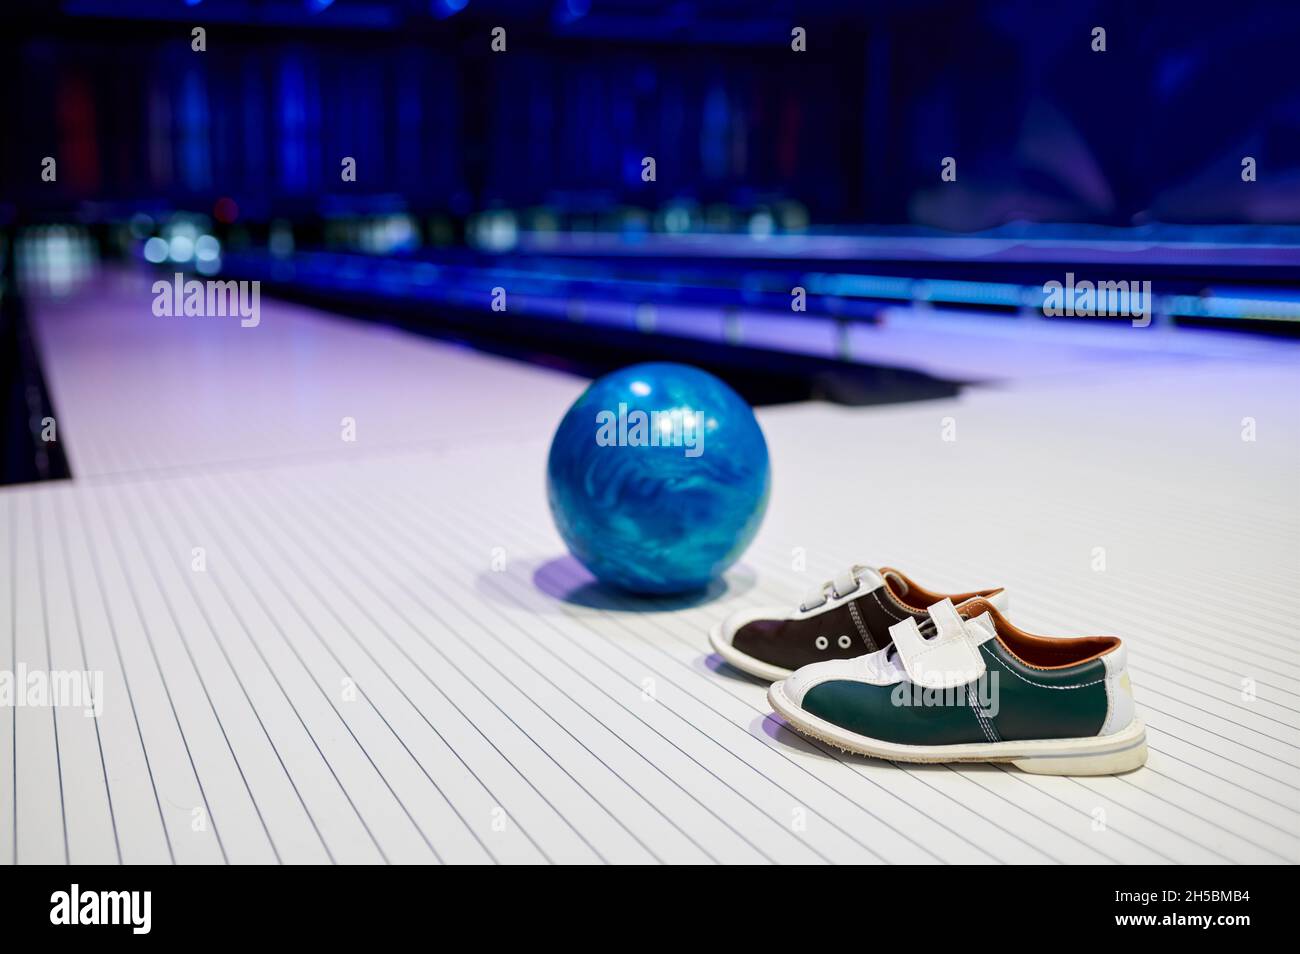 Ball and house shoes, bowling, game concept Stock Photo